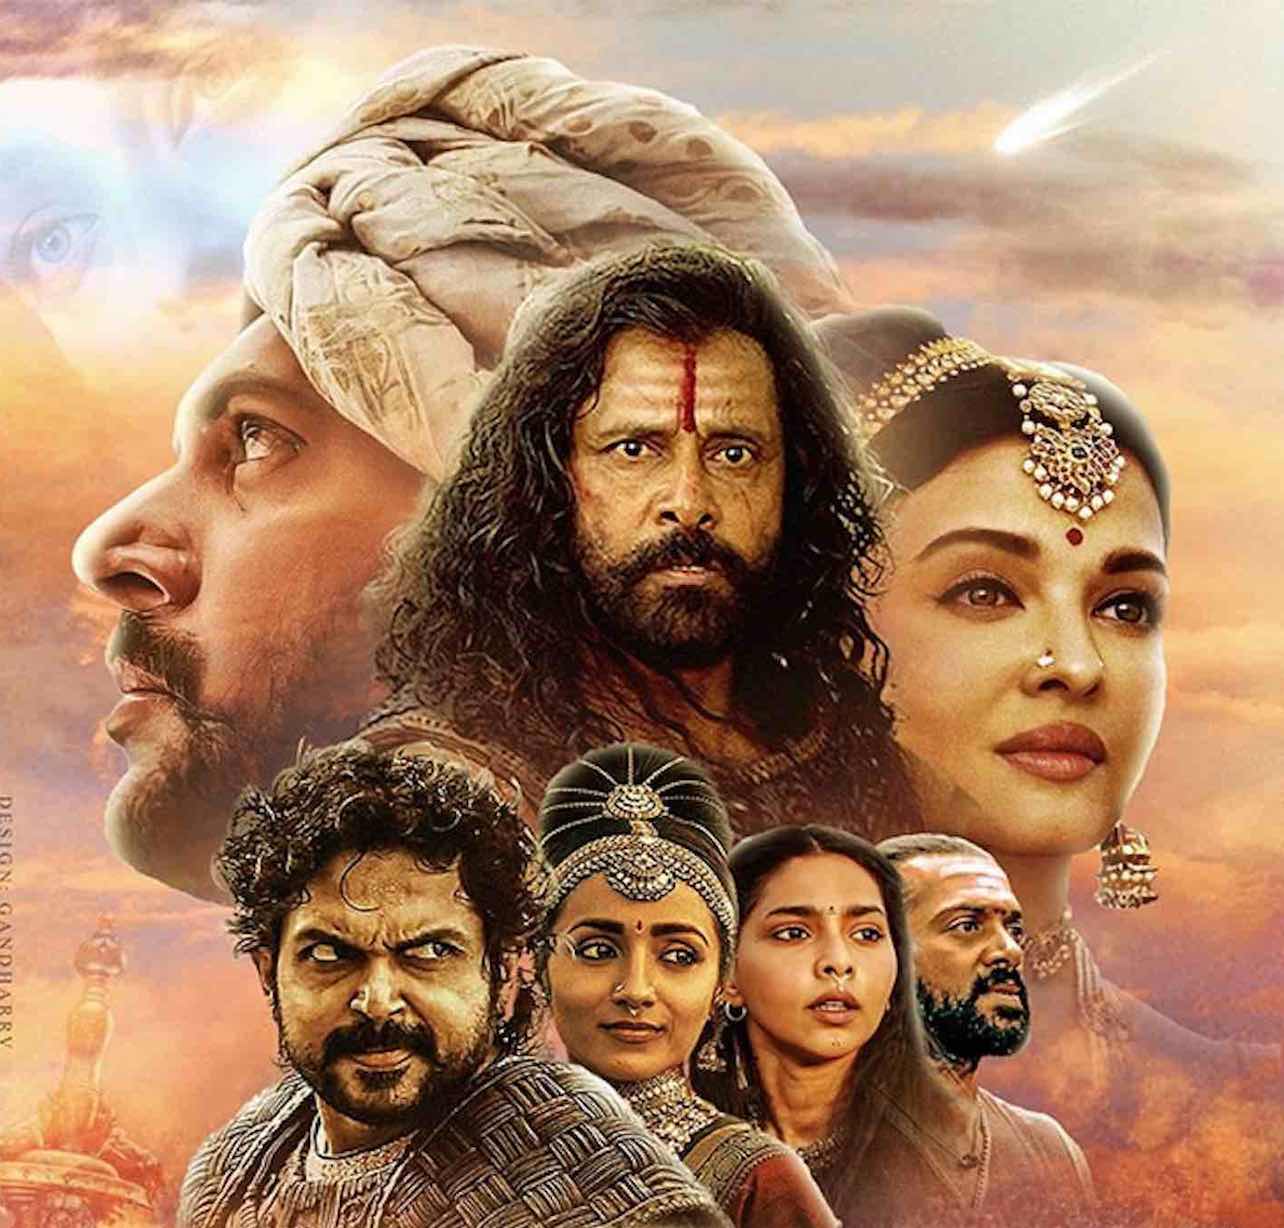 The India Box Office Report: April 2023